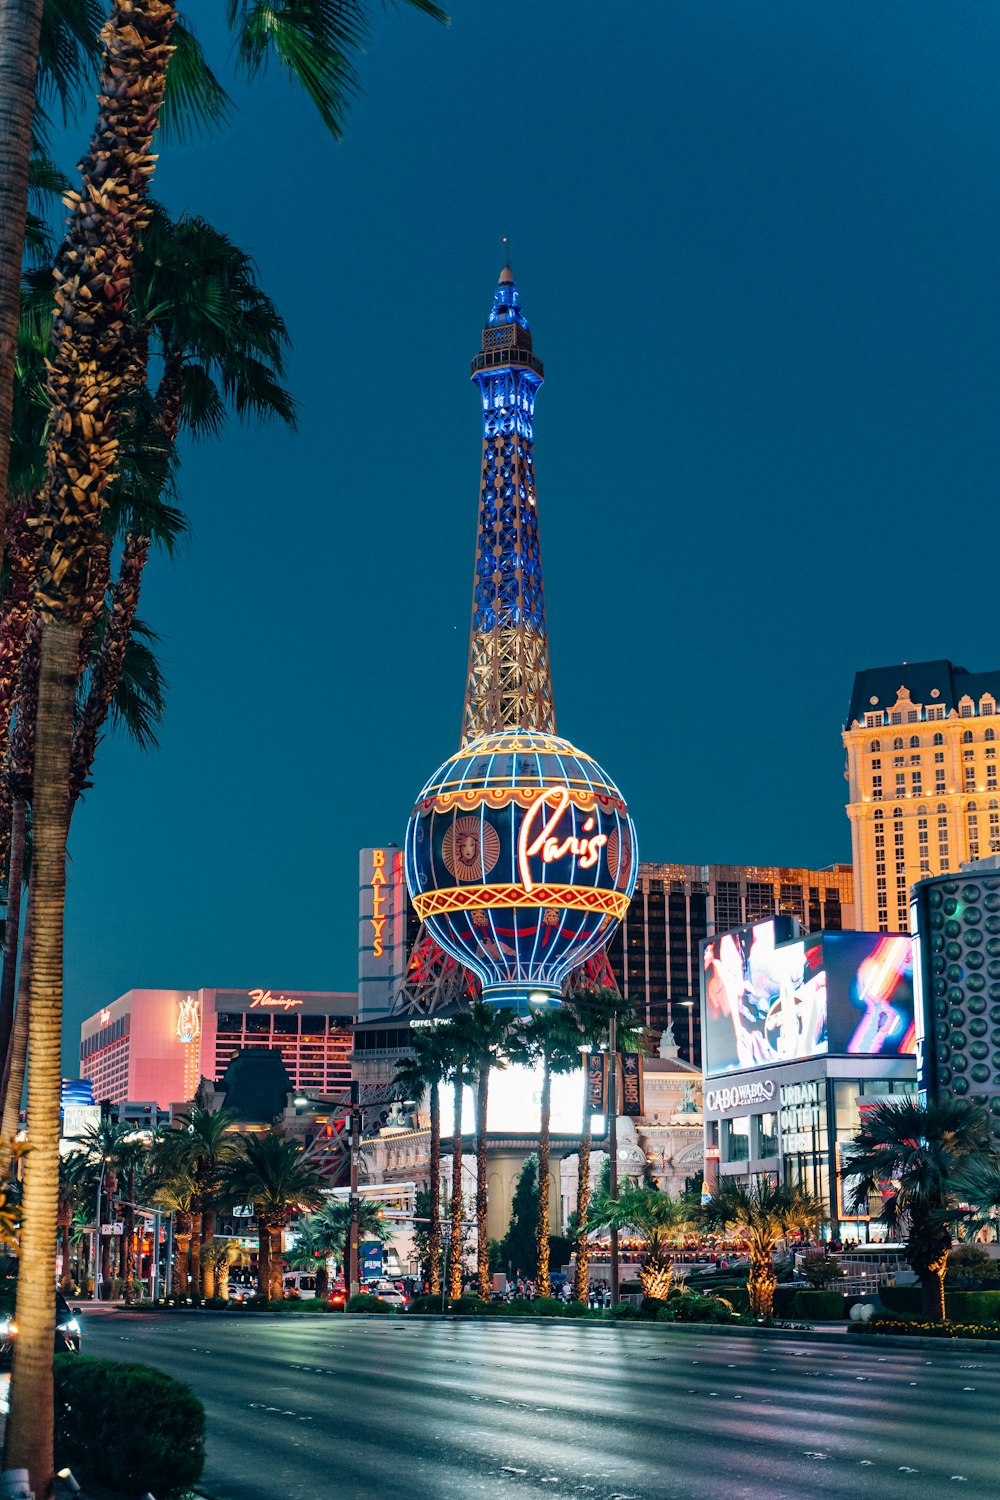 Eiffel Tower In Las Vegas At Night Stock Photo, Picture and